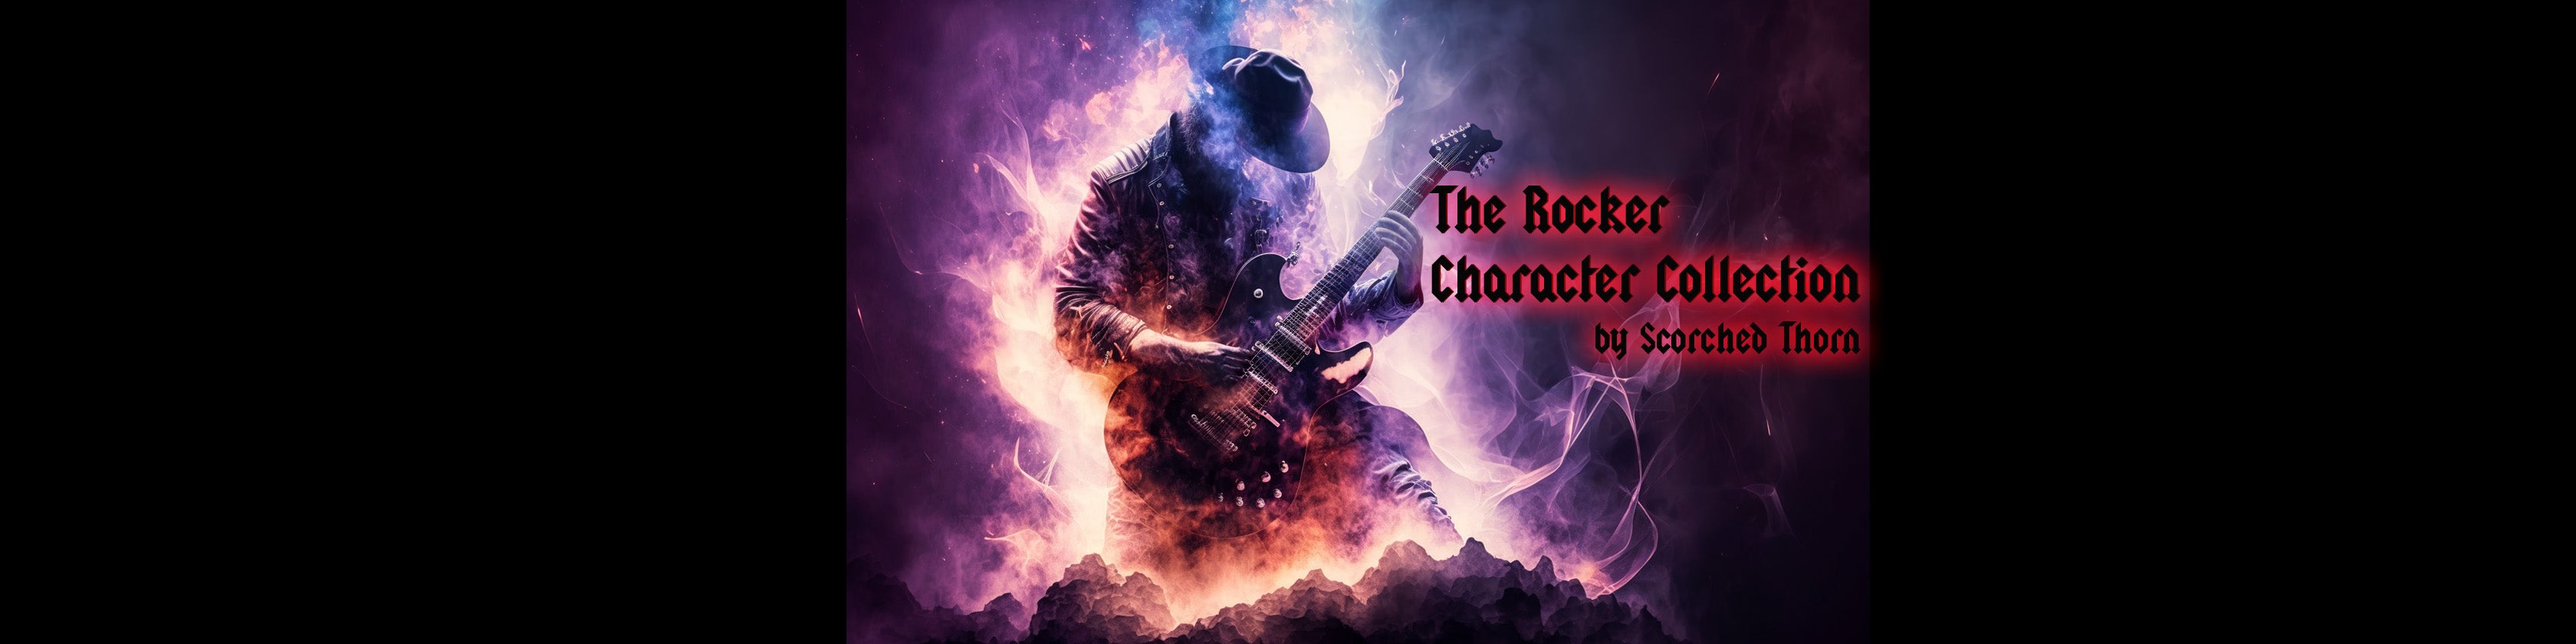 Rocker Character Collection from Scorched Thorn